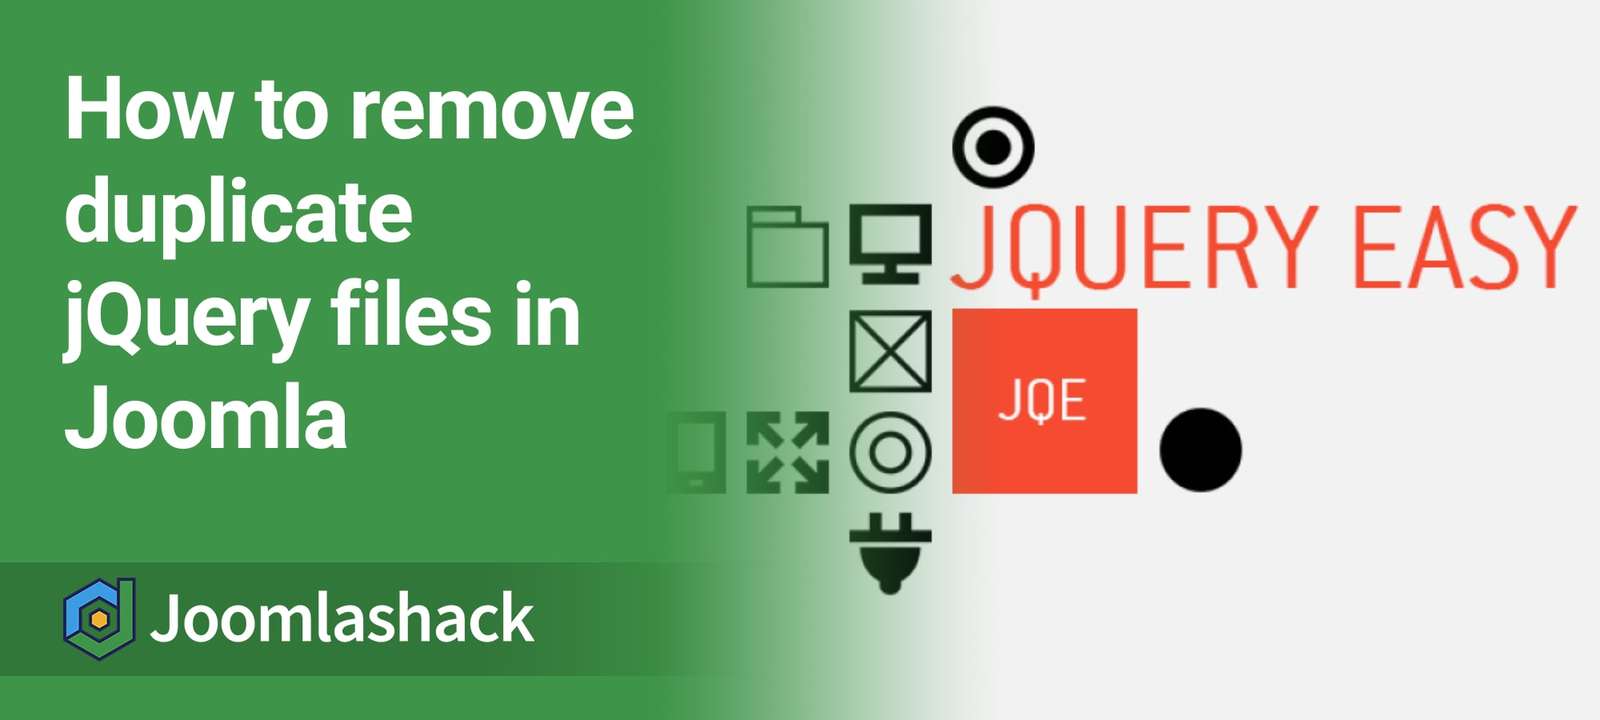 Remove Duplicate jQuery Files in Joomla With jQuery Easy